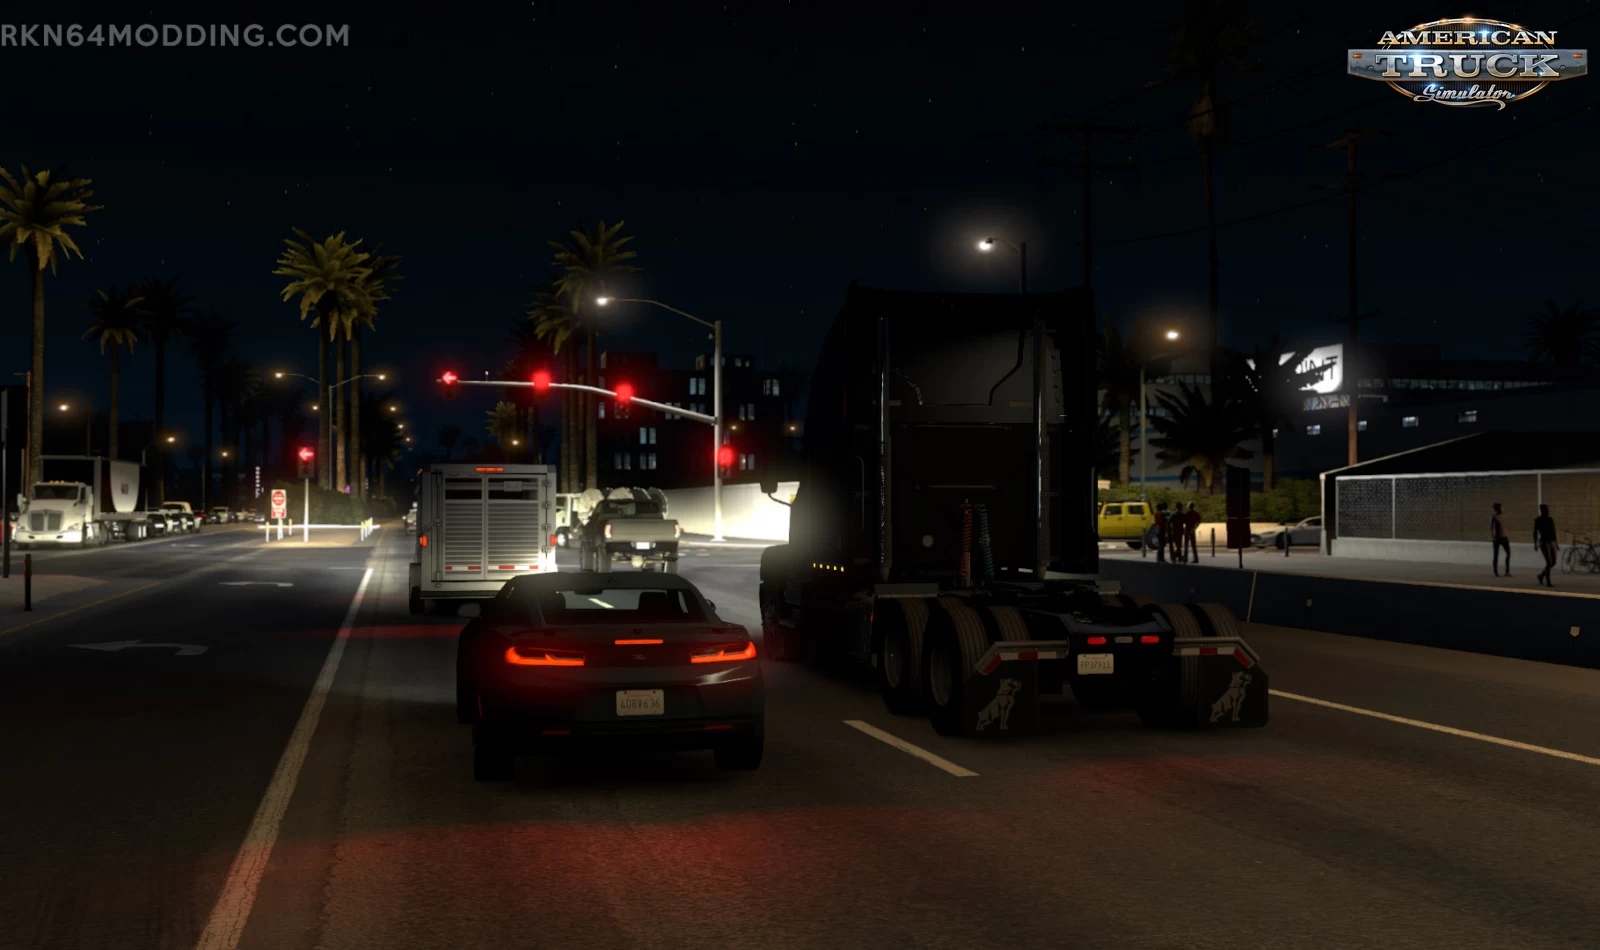 Non-Flared Vehicle Lights v5.1 by Frkn64 (1.44.x) for ATS